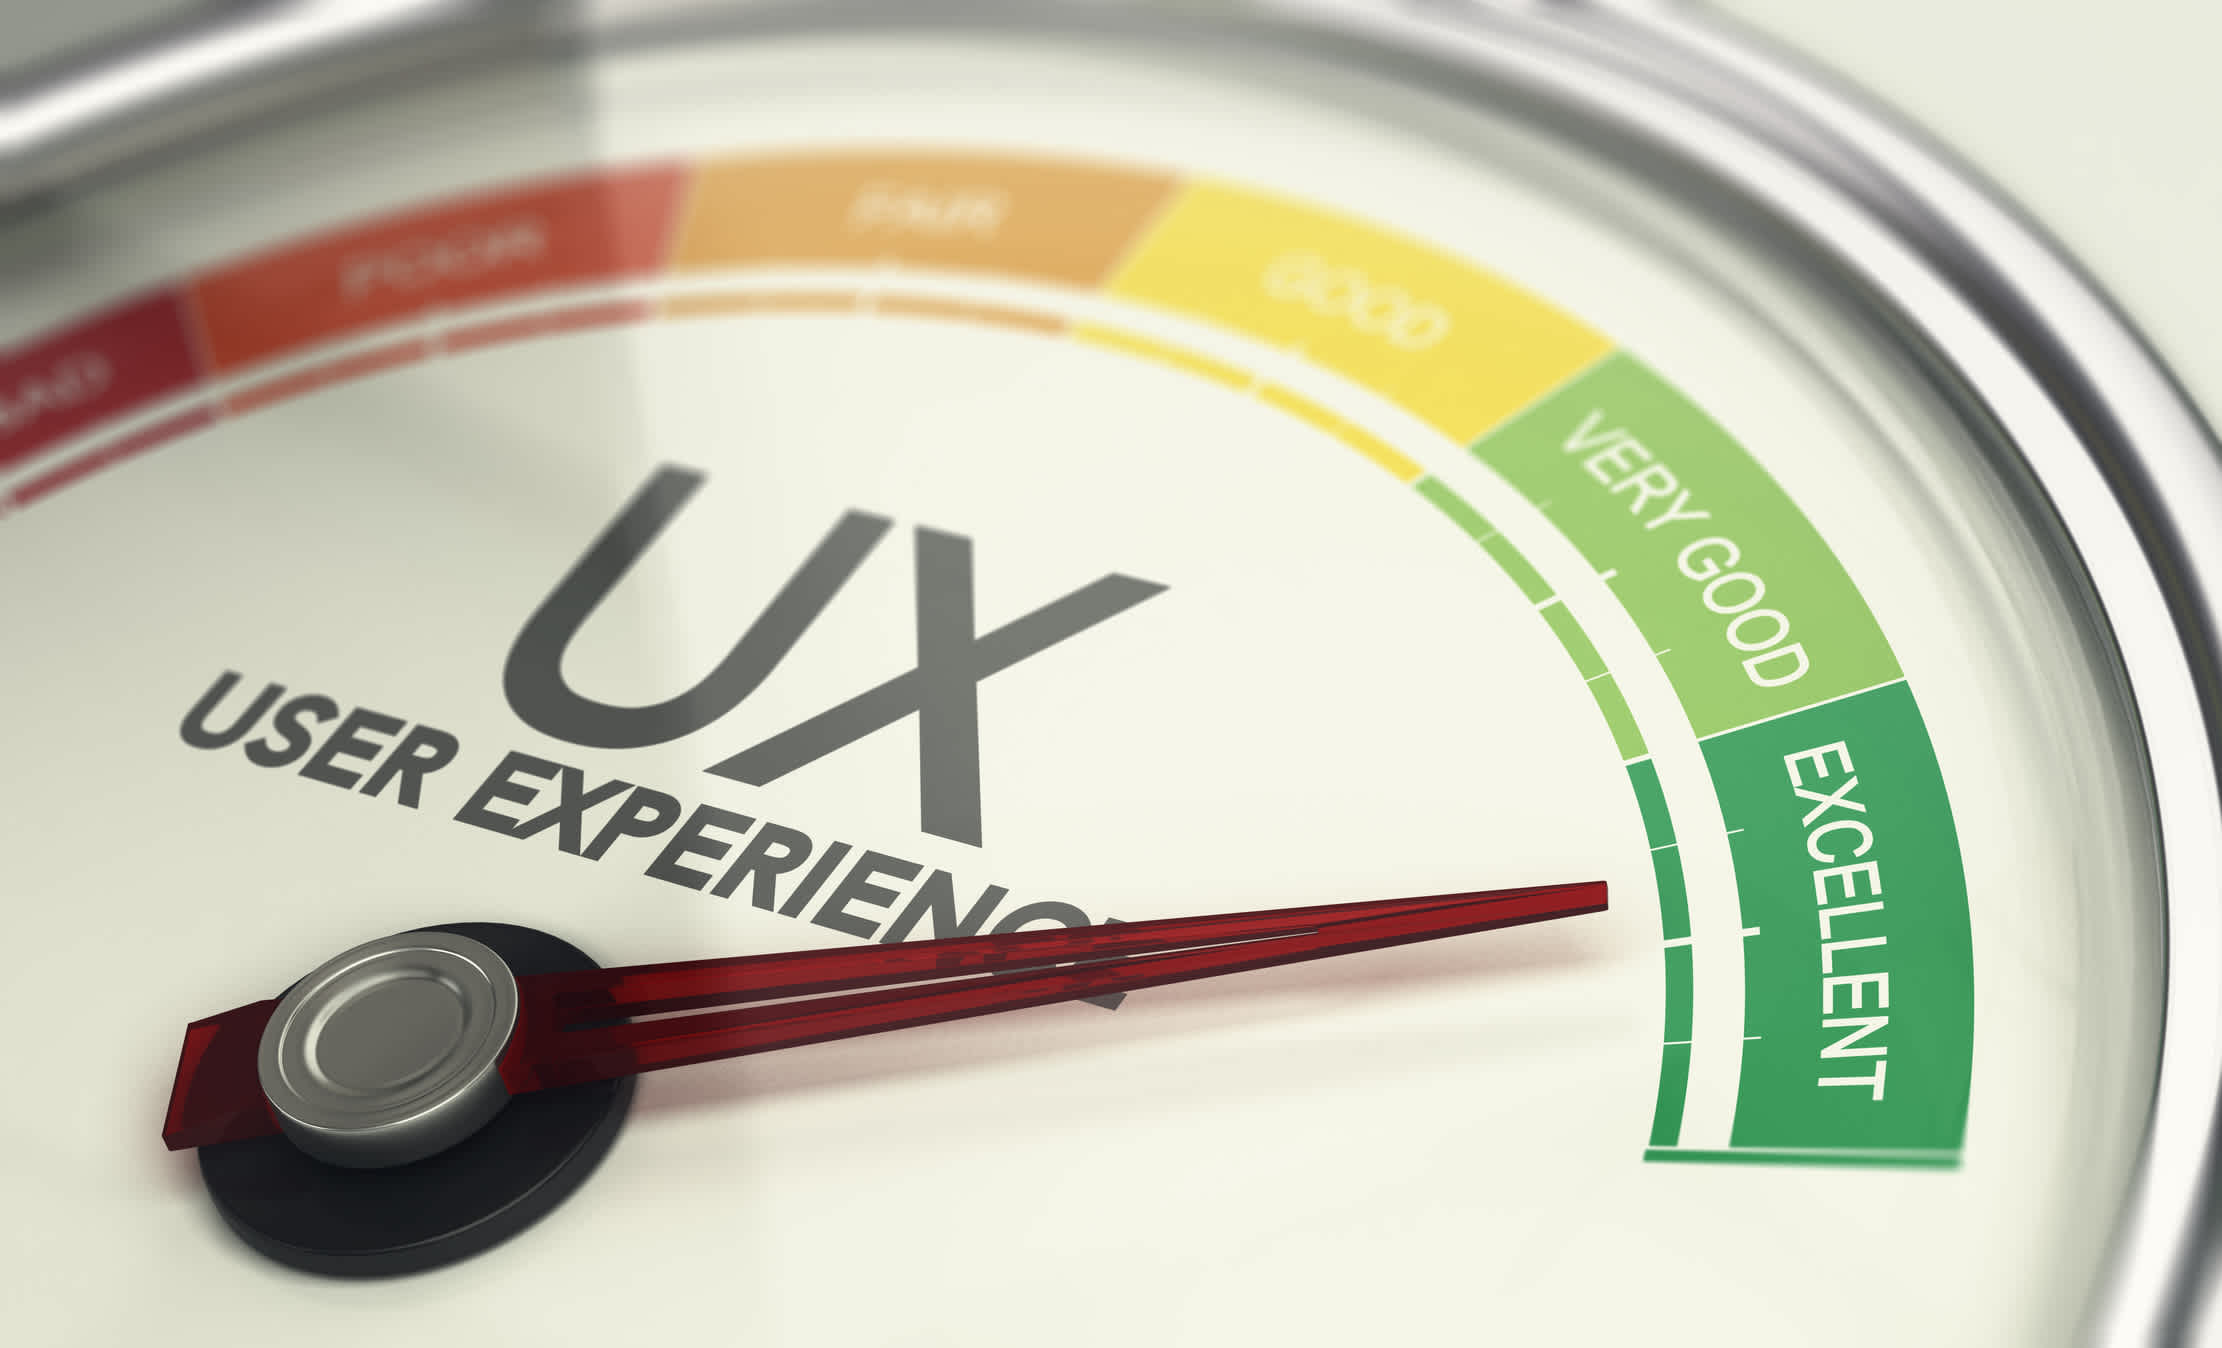 user experience excellence gauge 